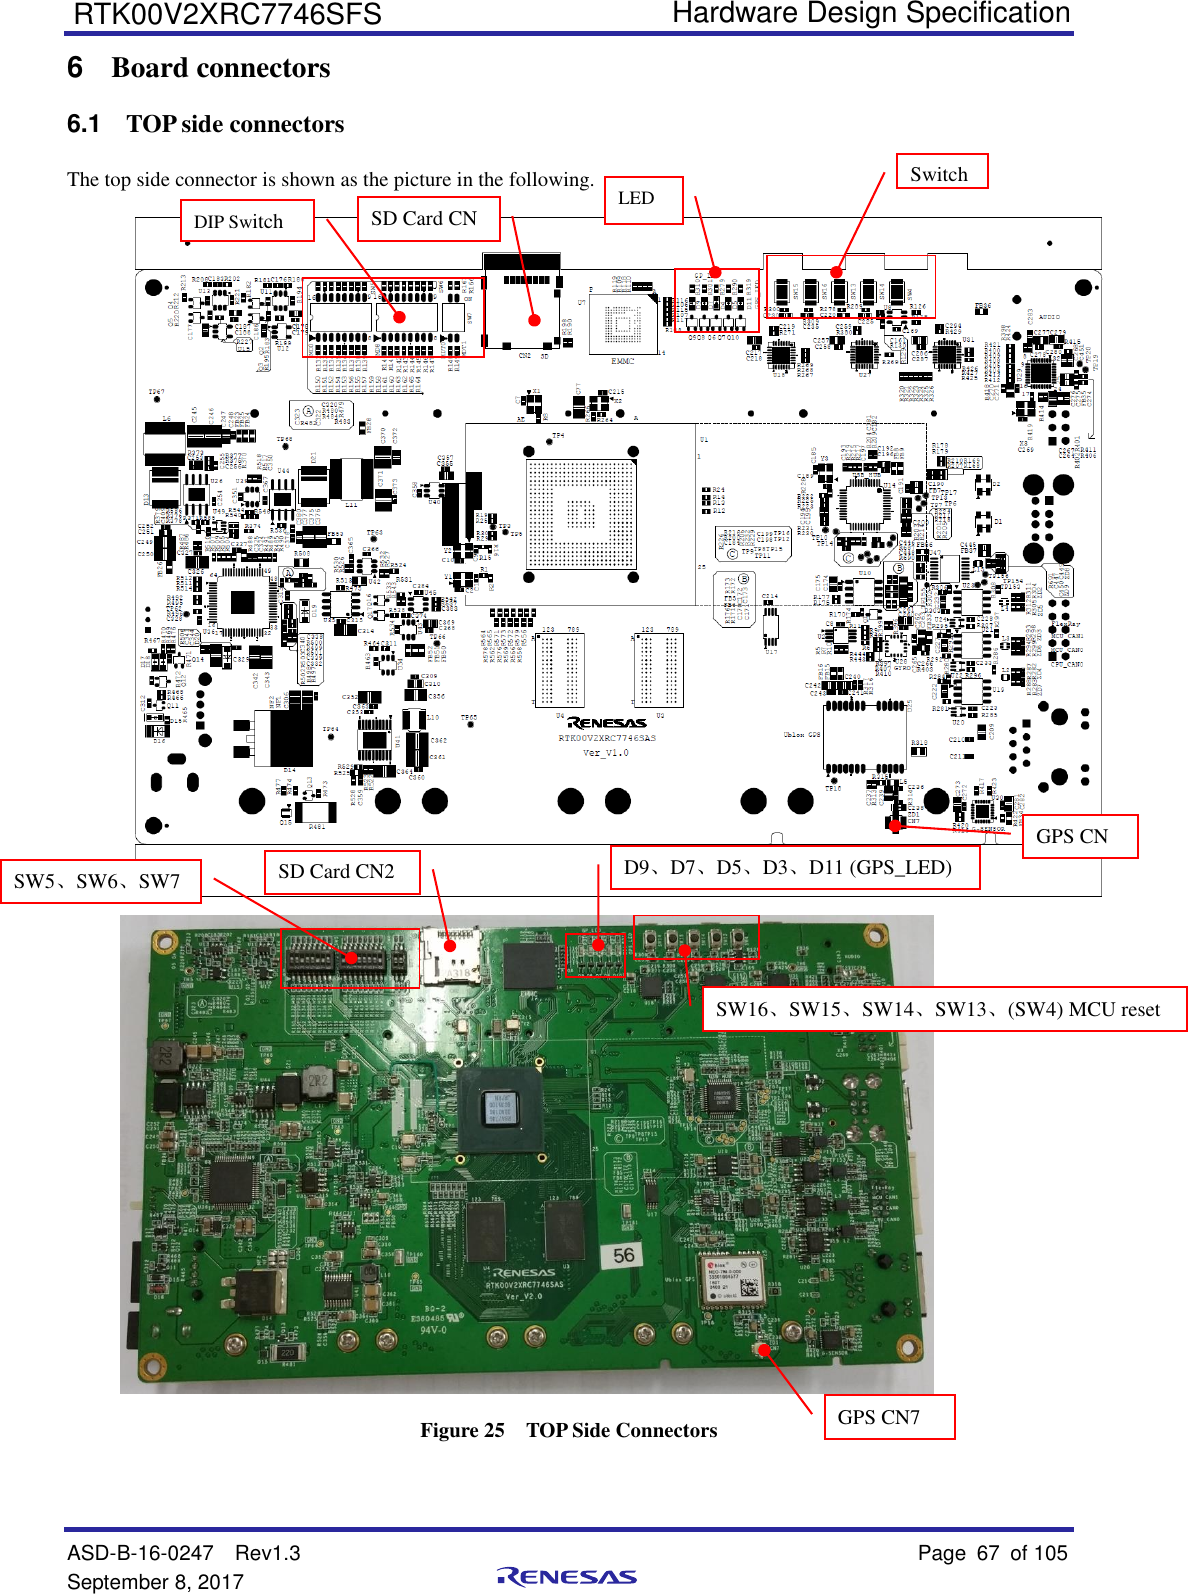   Hardware Design Specification ASD-B-16-0247  Rev1.3    Page 67  of 105 September 8, 2017      RTK00V2XRC7746SFS 6  Board connectors 6.1  TOP side connectors The top side connector is shown as the picture in the following.   Figure 25  TOP Side Connectors SD Card CN2 GPS CN7 SD Card CN GPS CN DIP Switch   Switch  LED SW5、SW6、SW7 D9、D7、D5、D3、D11 (GPS_LED) SW16、SW15、SW14、SW13、(SW4) MCU reset      